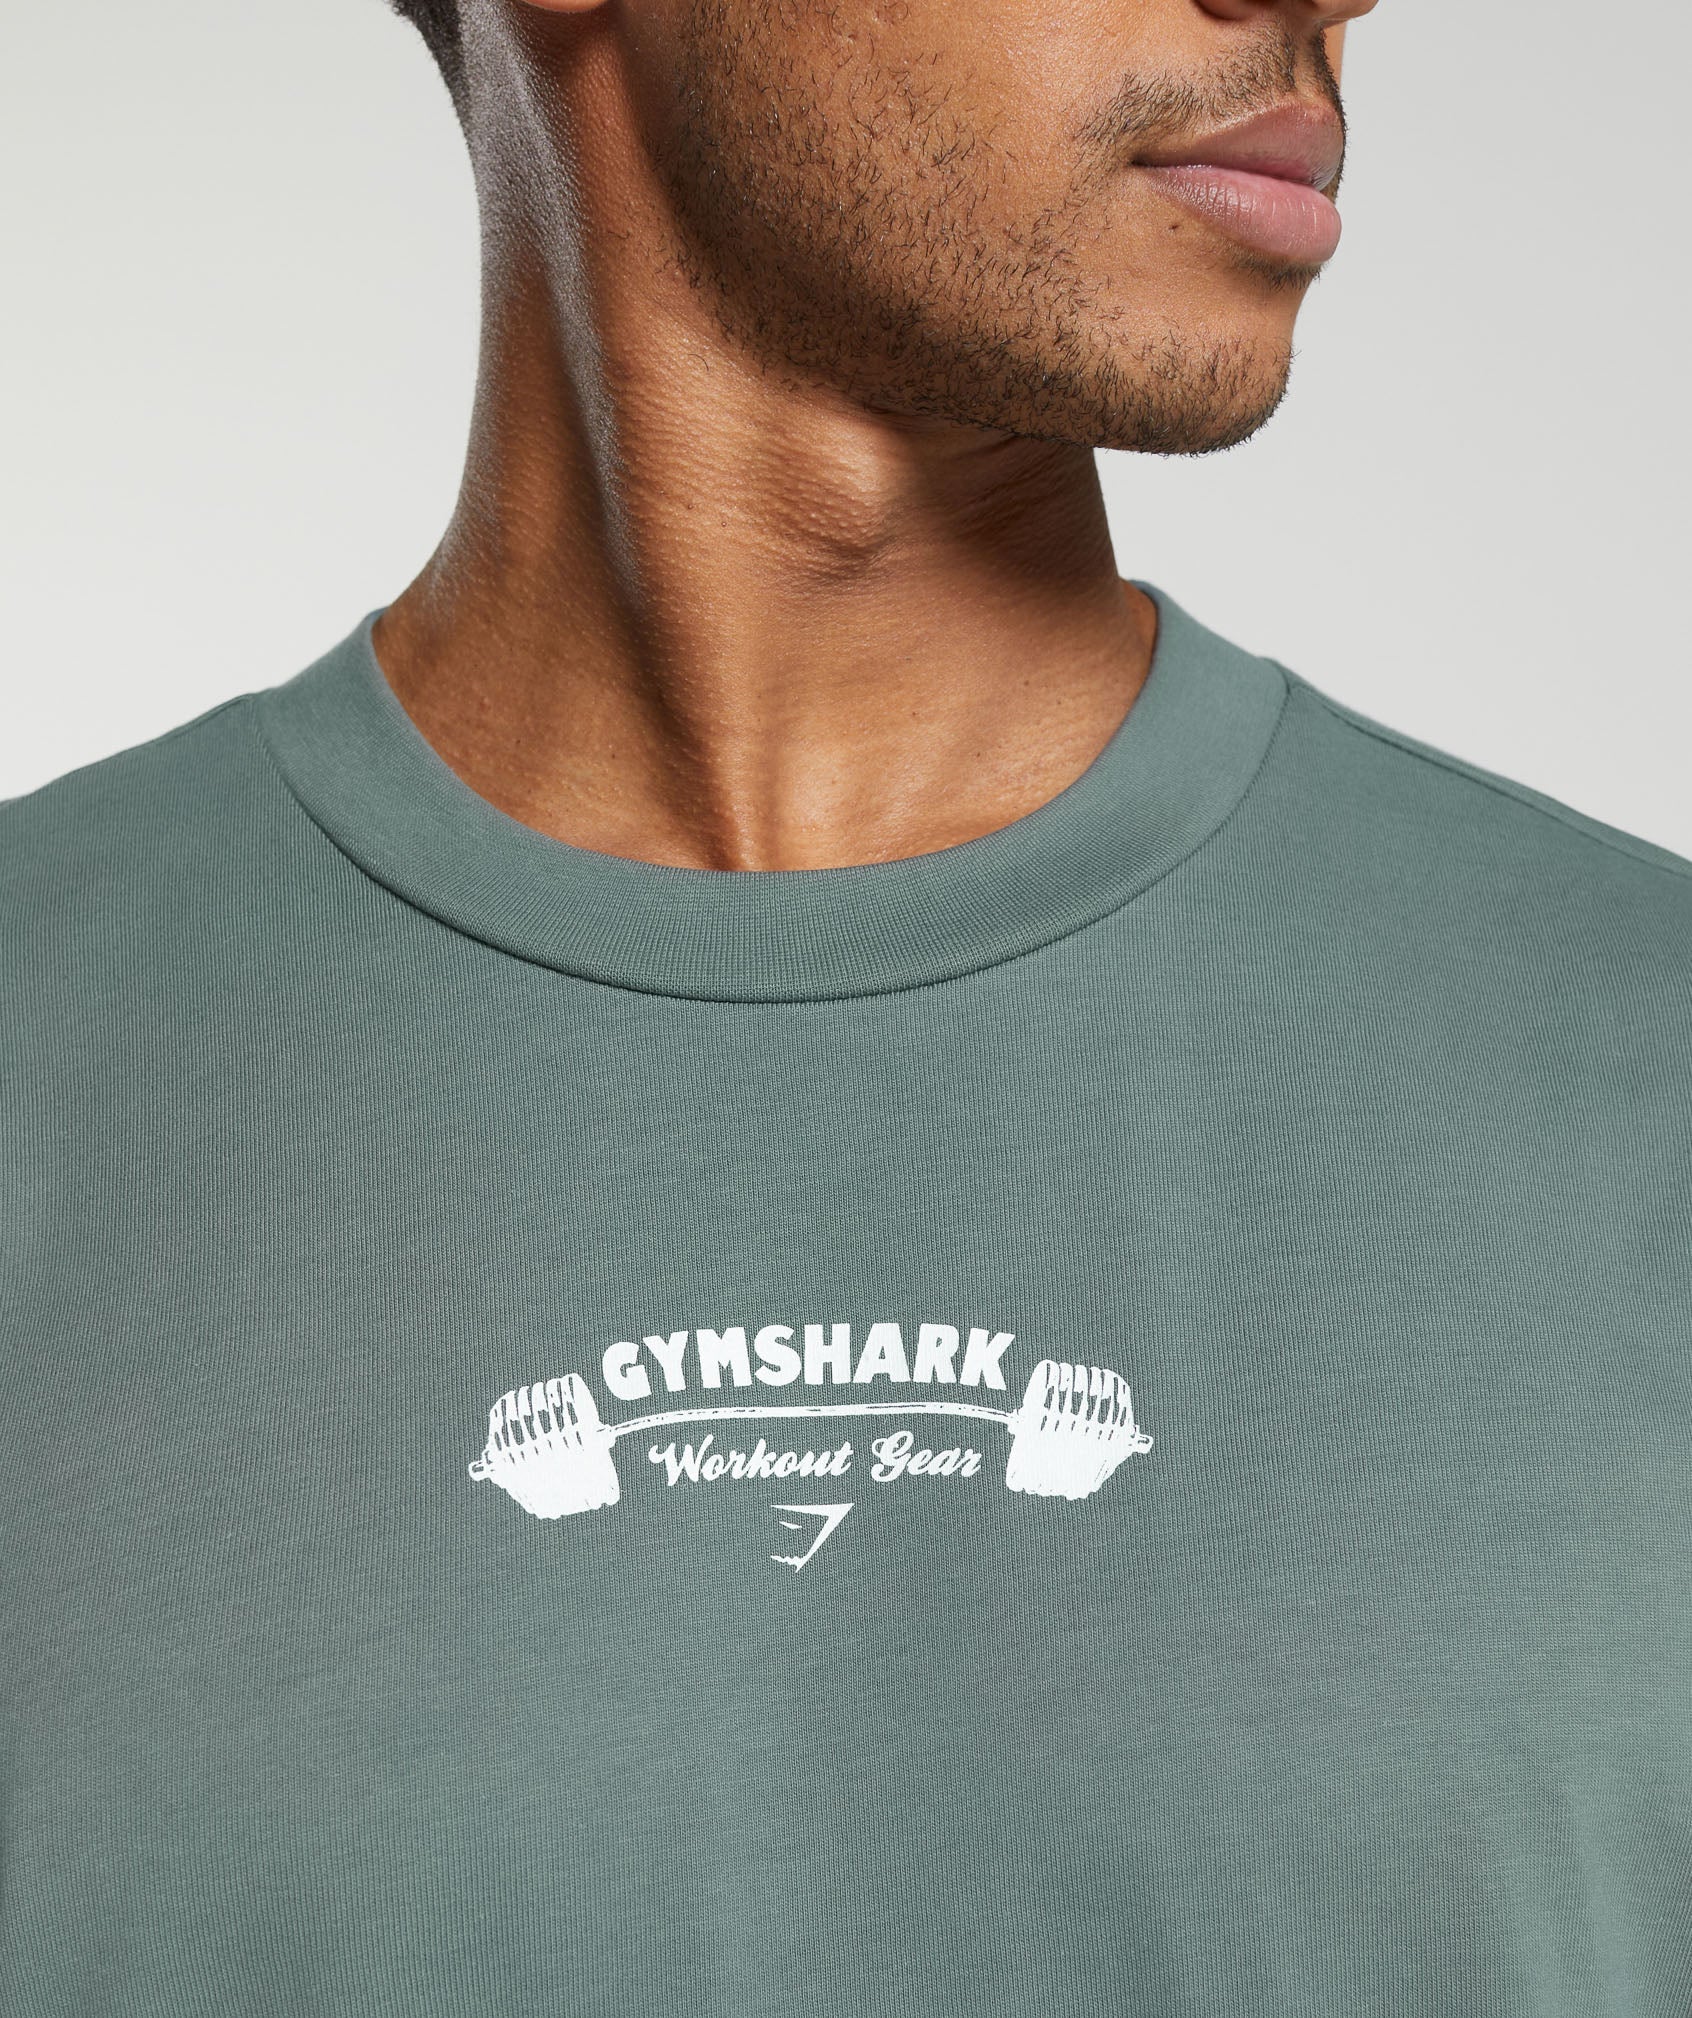 Workout Gear T-Shirt in Cargo Teal - view 5